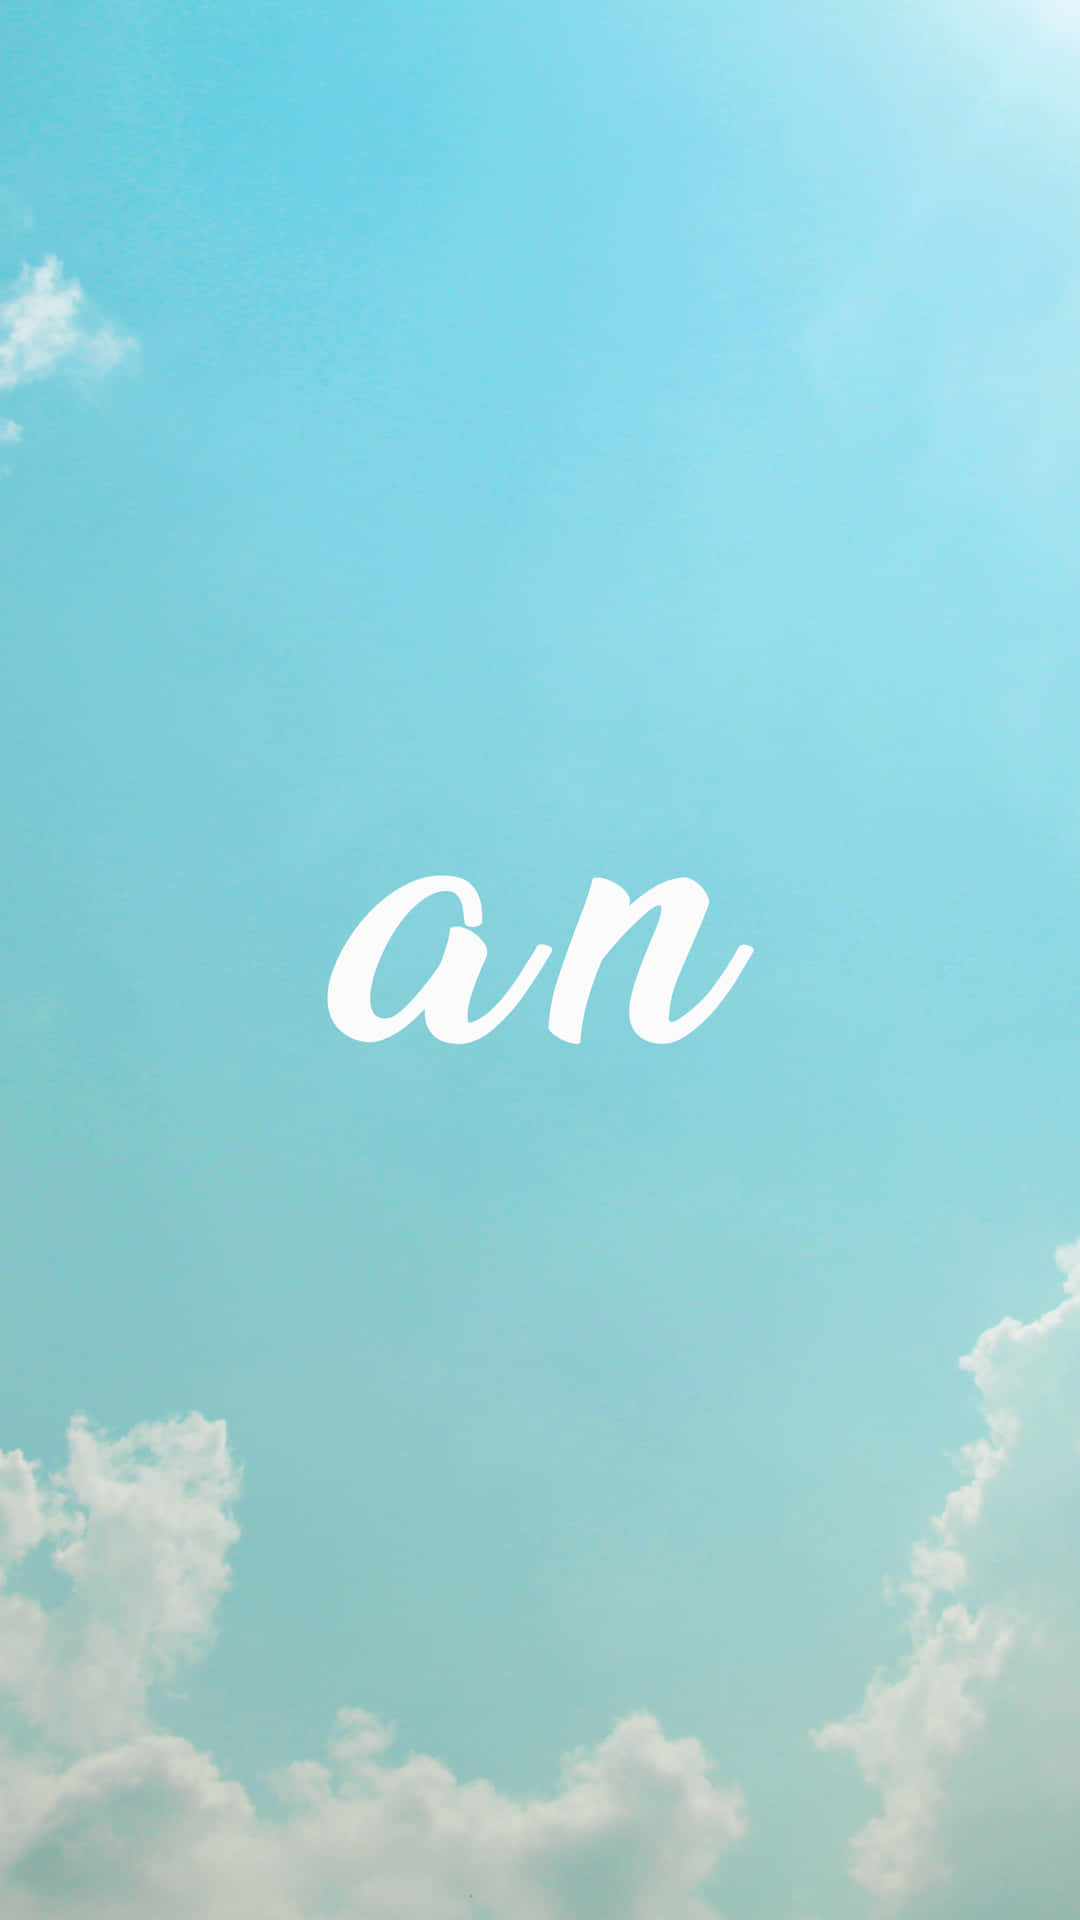 An On The Clouds Wallpaper